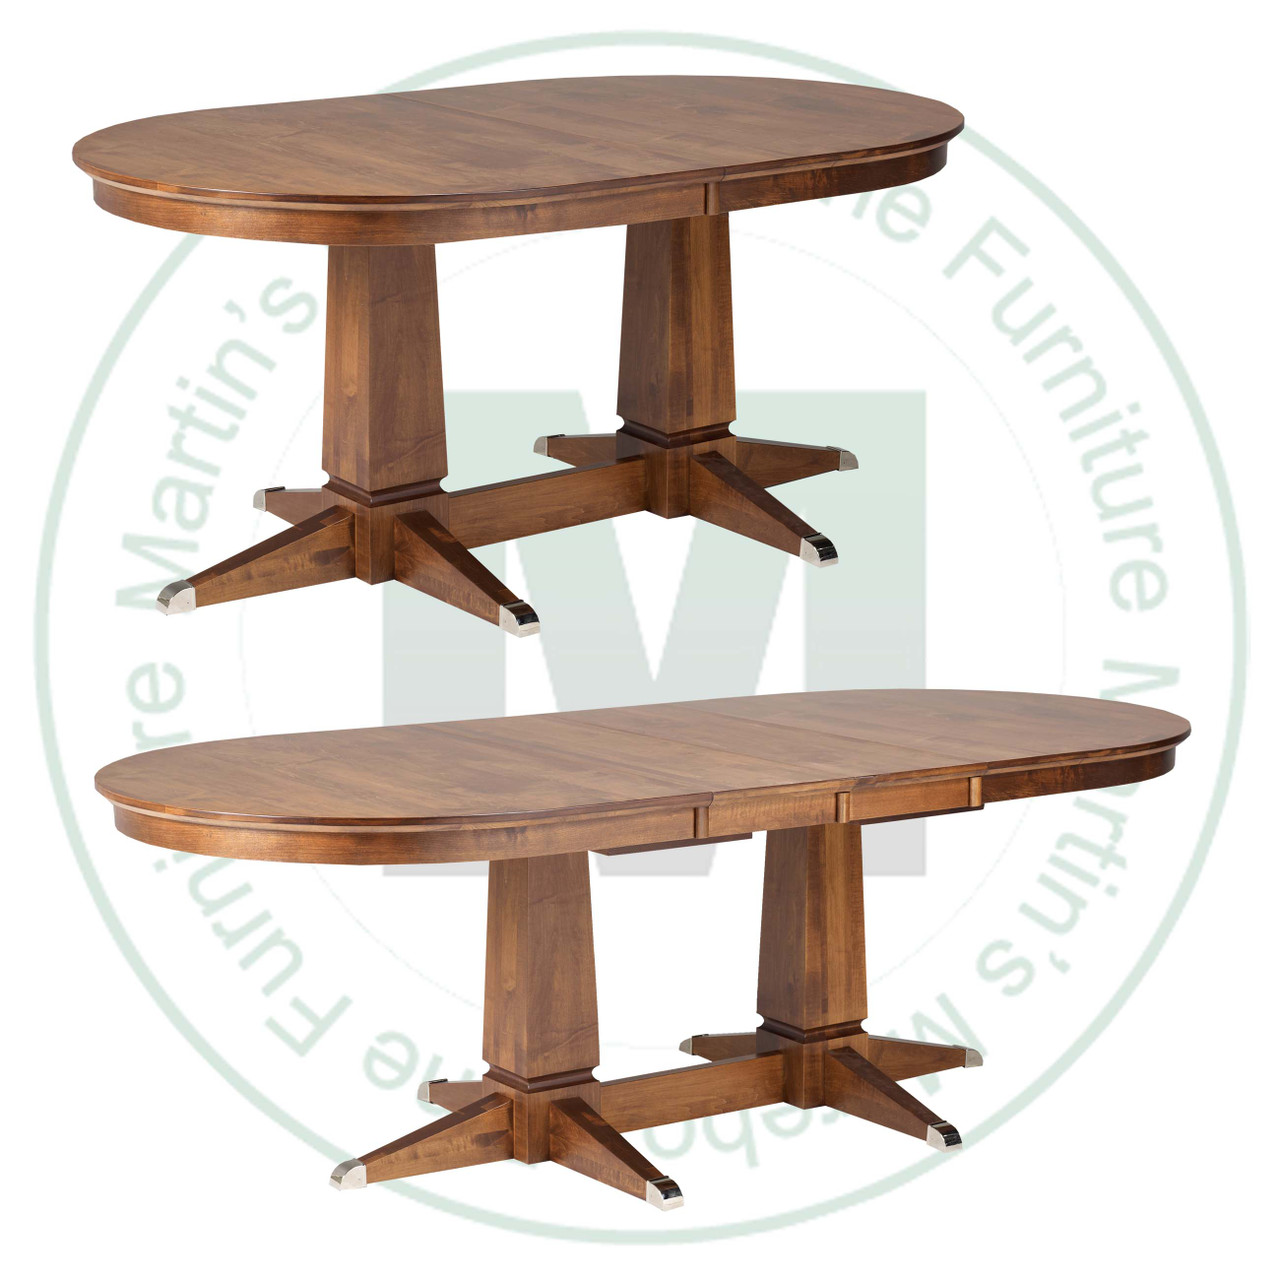 Maple Sweden Double Pedestal Table 48''D x 84''W x 30''H With 3 - 12'' Leaves